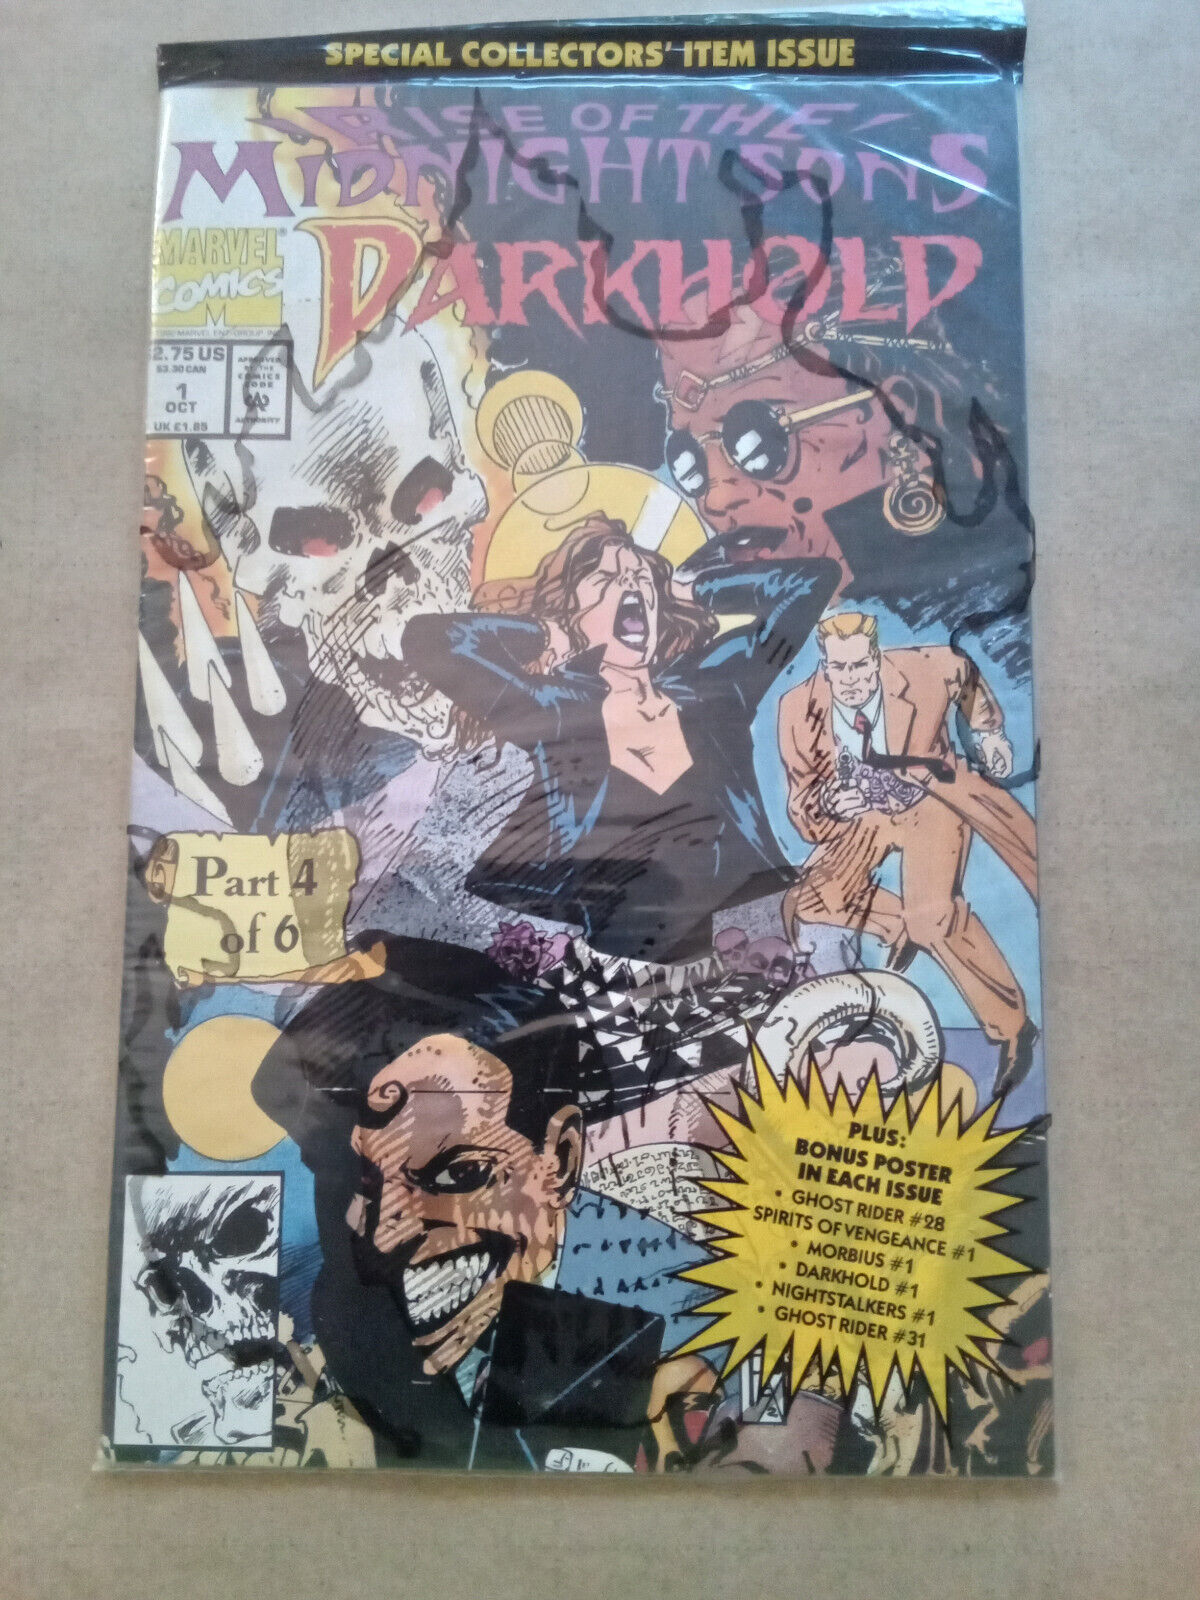 Darkhold: Pages from the Book of Sins #1 (1992) - Sealed Polybag - High Grade